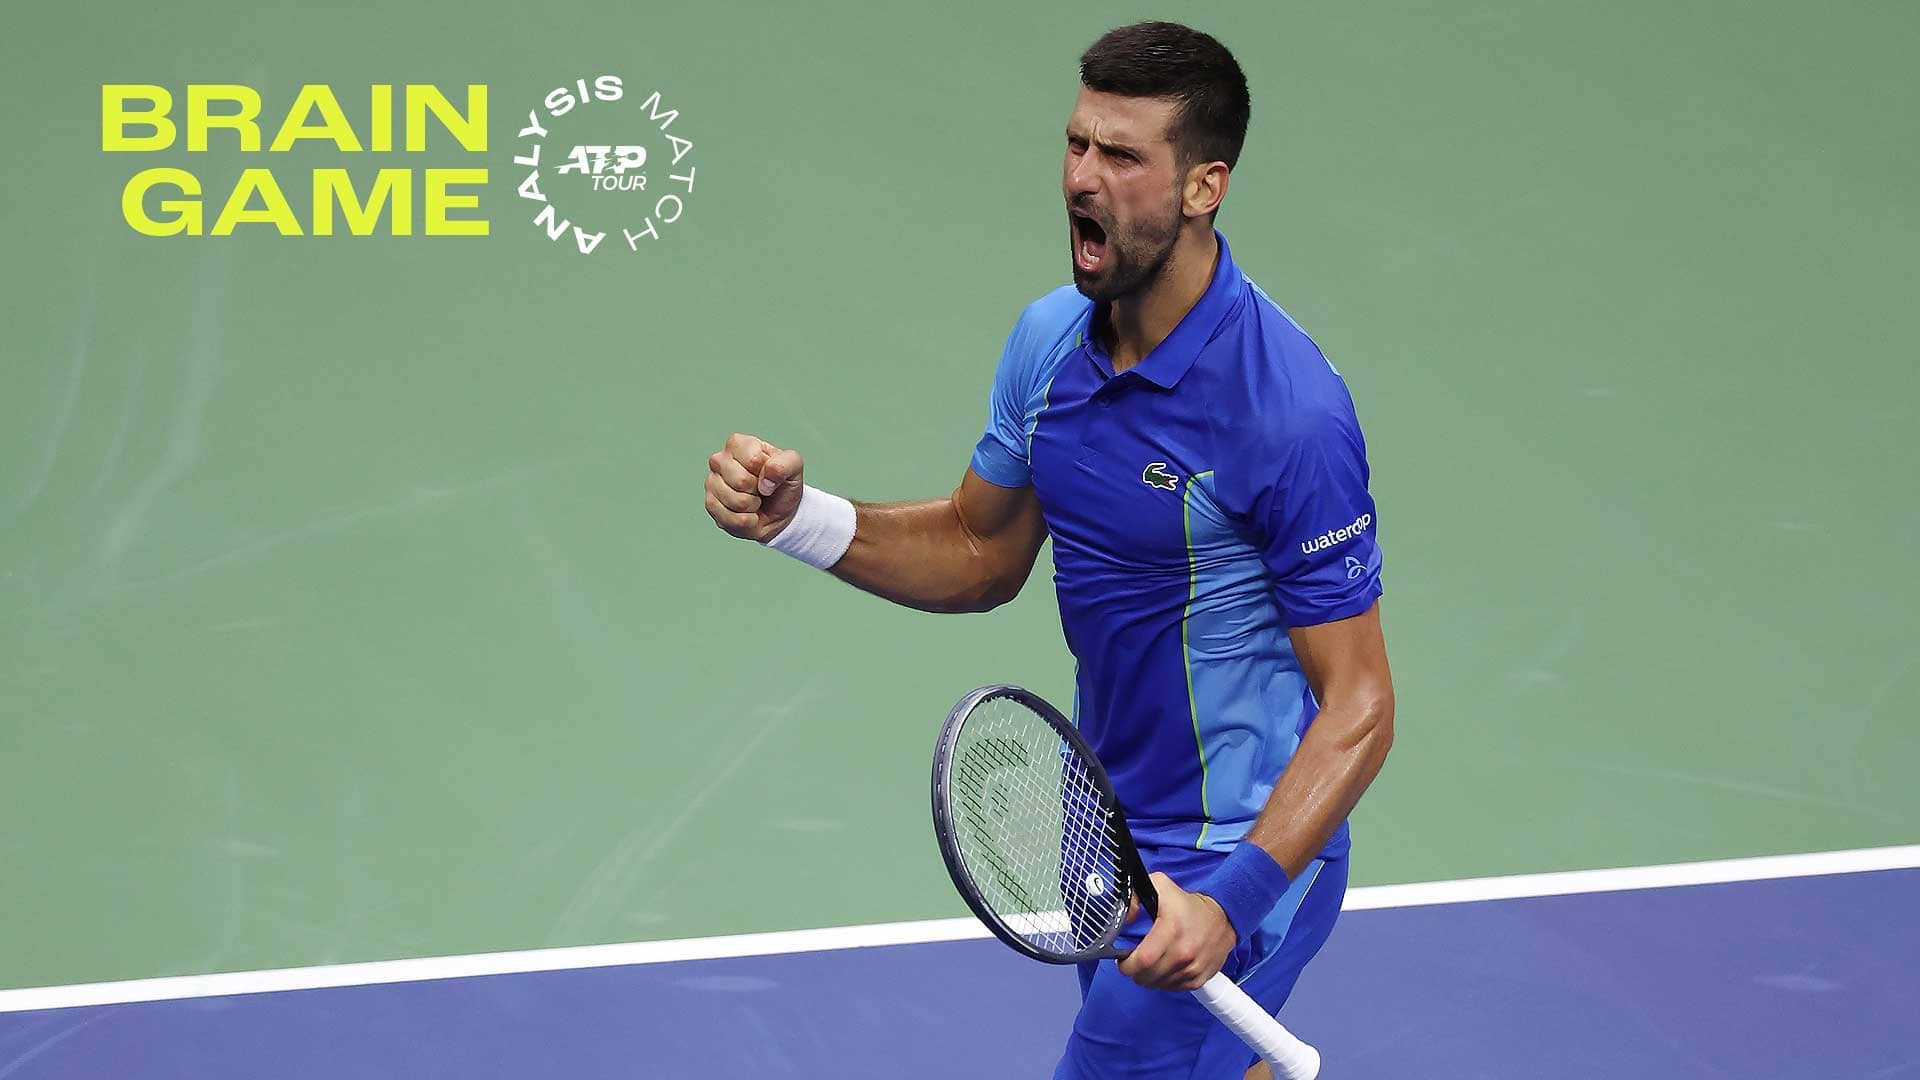 Novak Djokovic thrives in points of less than nine shots to defeat Daniil Medvedev in the US Open final.